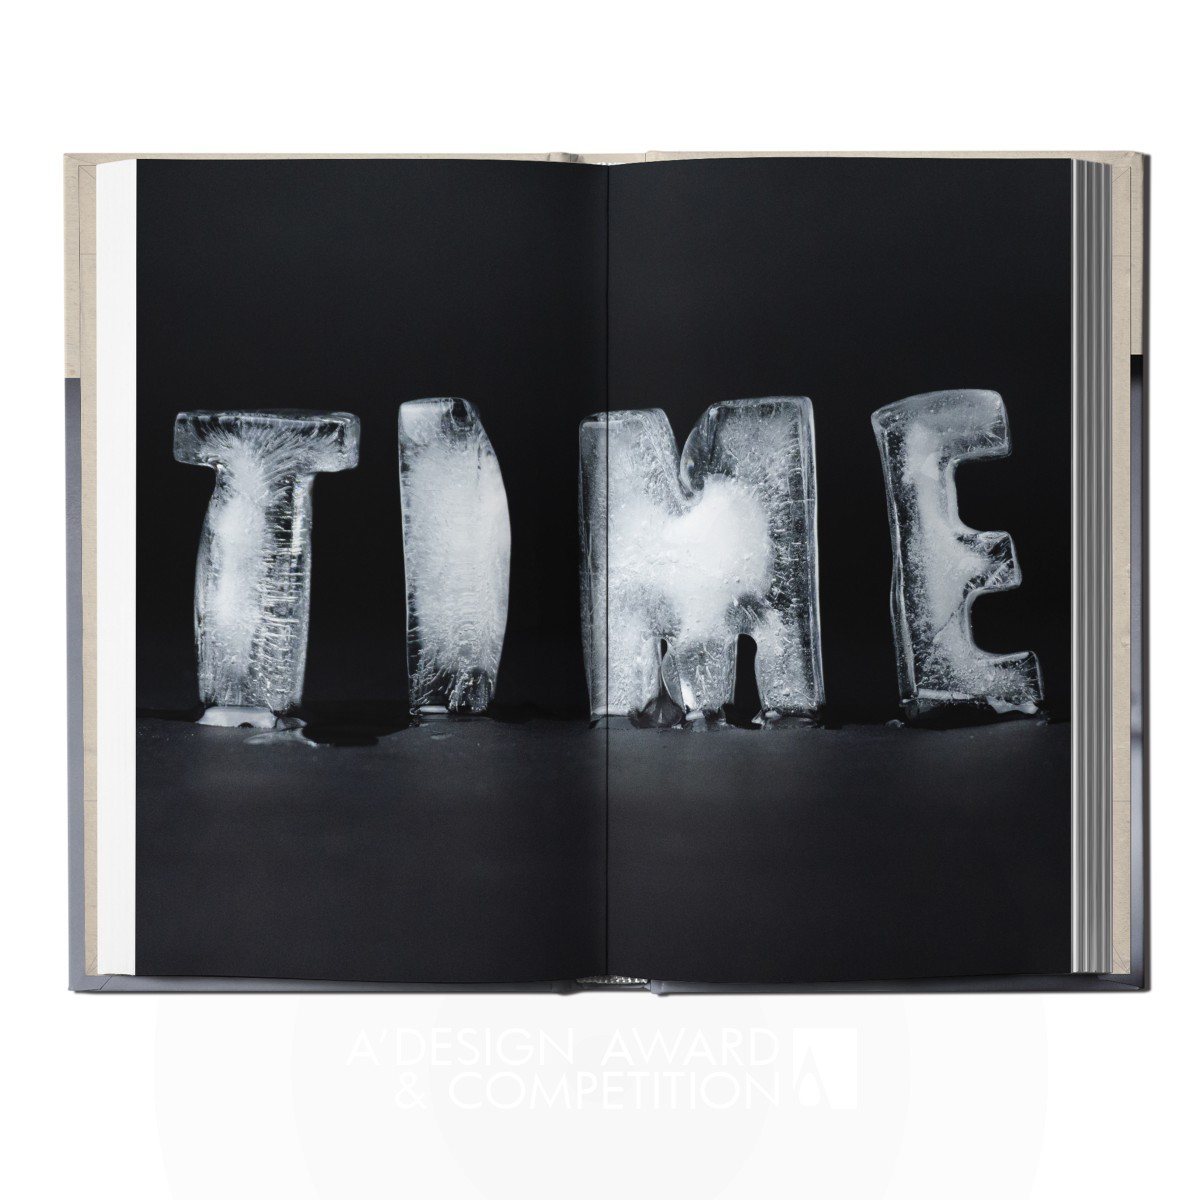 Zona Yuechen Guan wins Bronze at the prestigious A' Print and Published Media Design Award with Discussing Time Book.